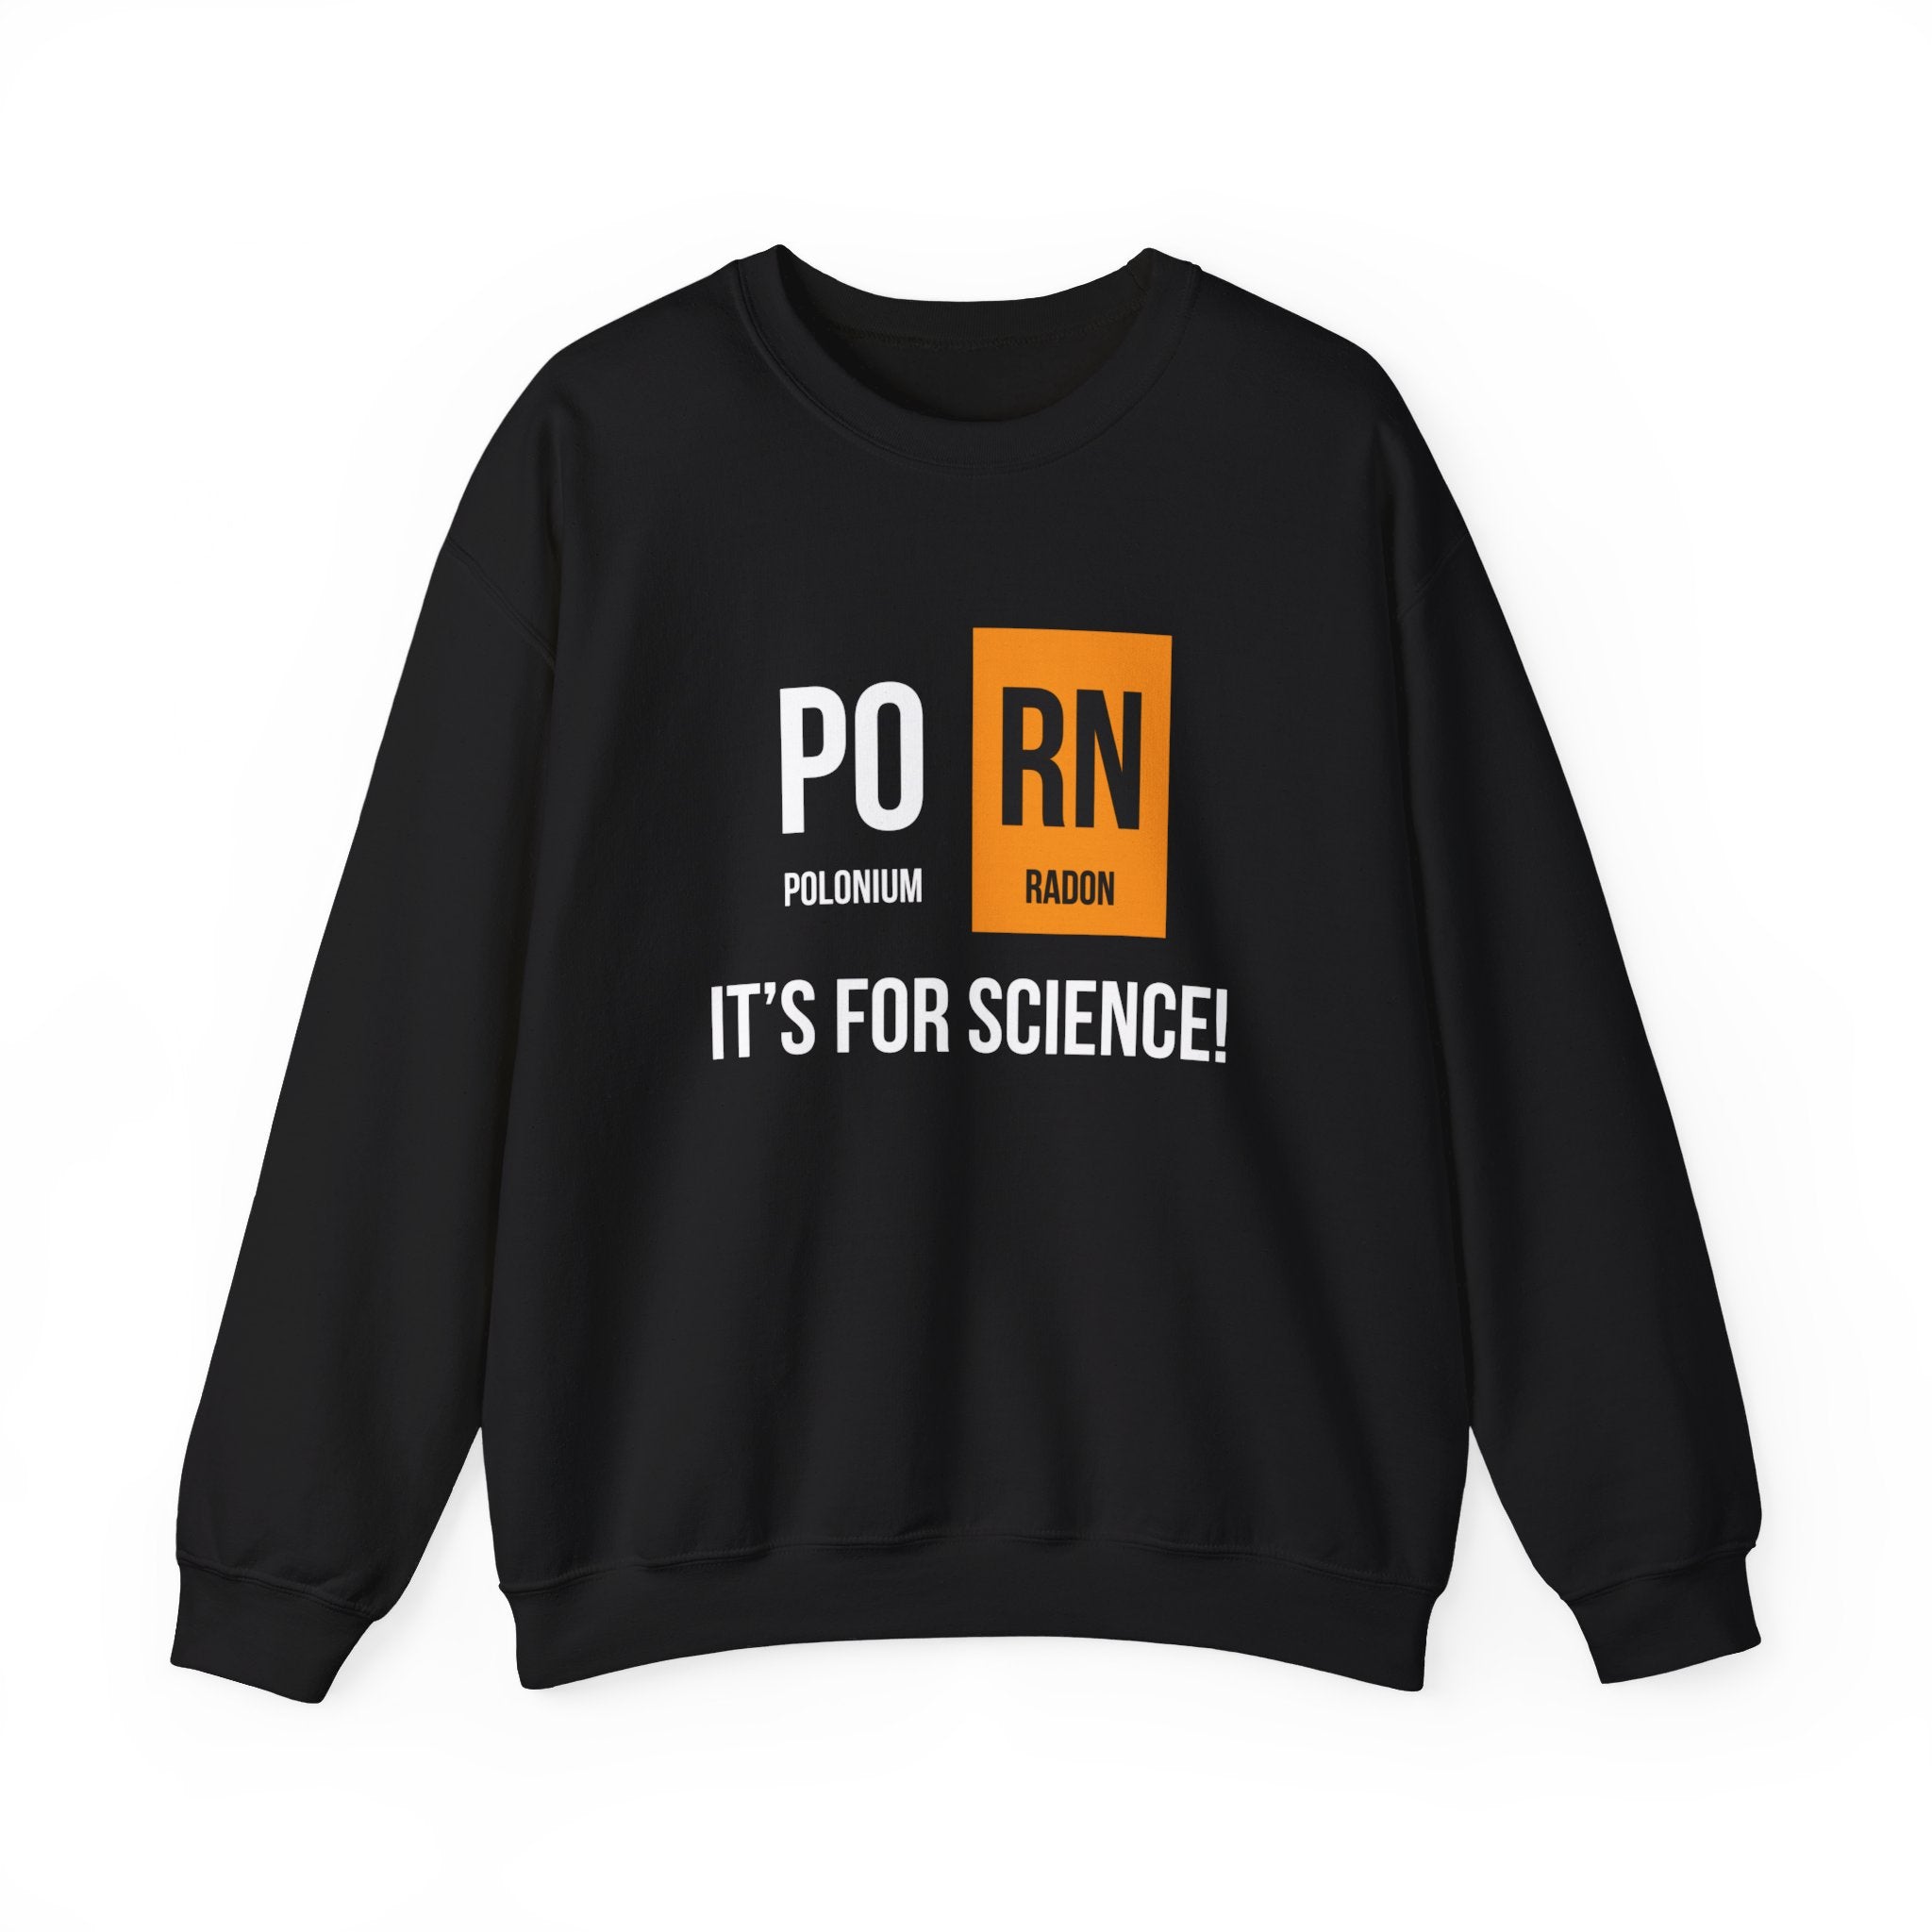 PO-RN - Sweatshirt with the text "Po RN" in large letters, referencing the chemical elements Polonium and Radon, and below it says "It's for science!" Cozy PO-RN design transforms chills into thrills during the colder months.